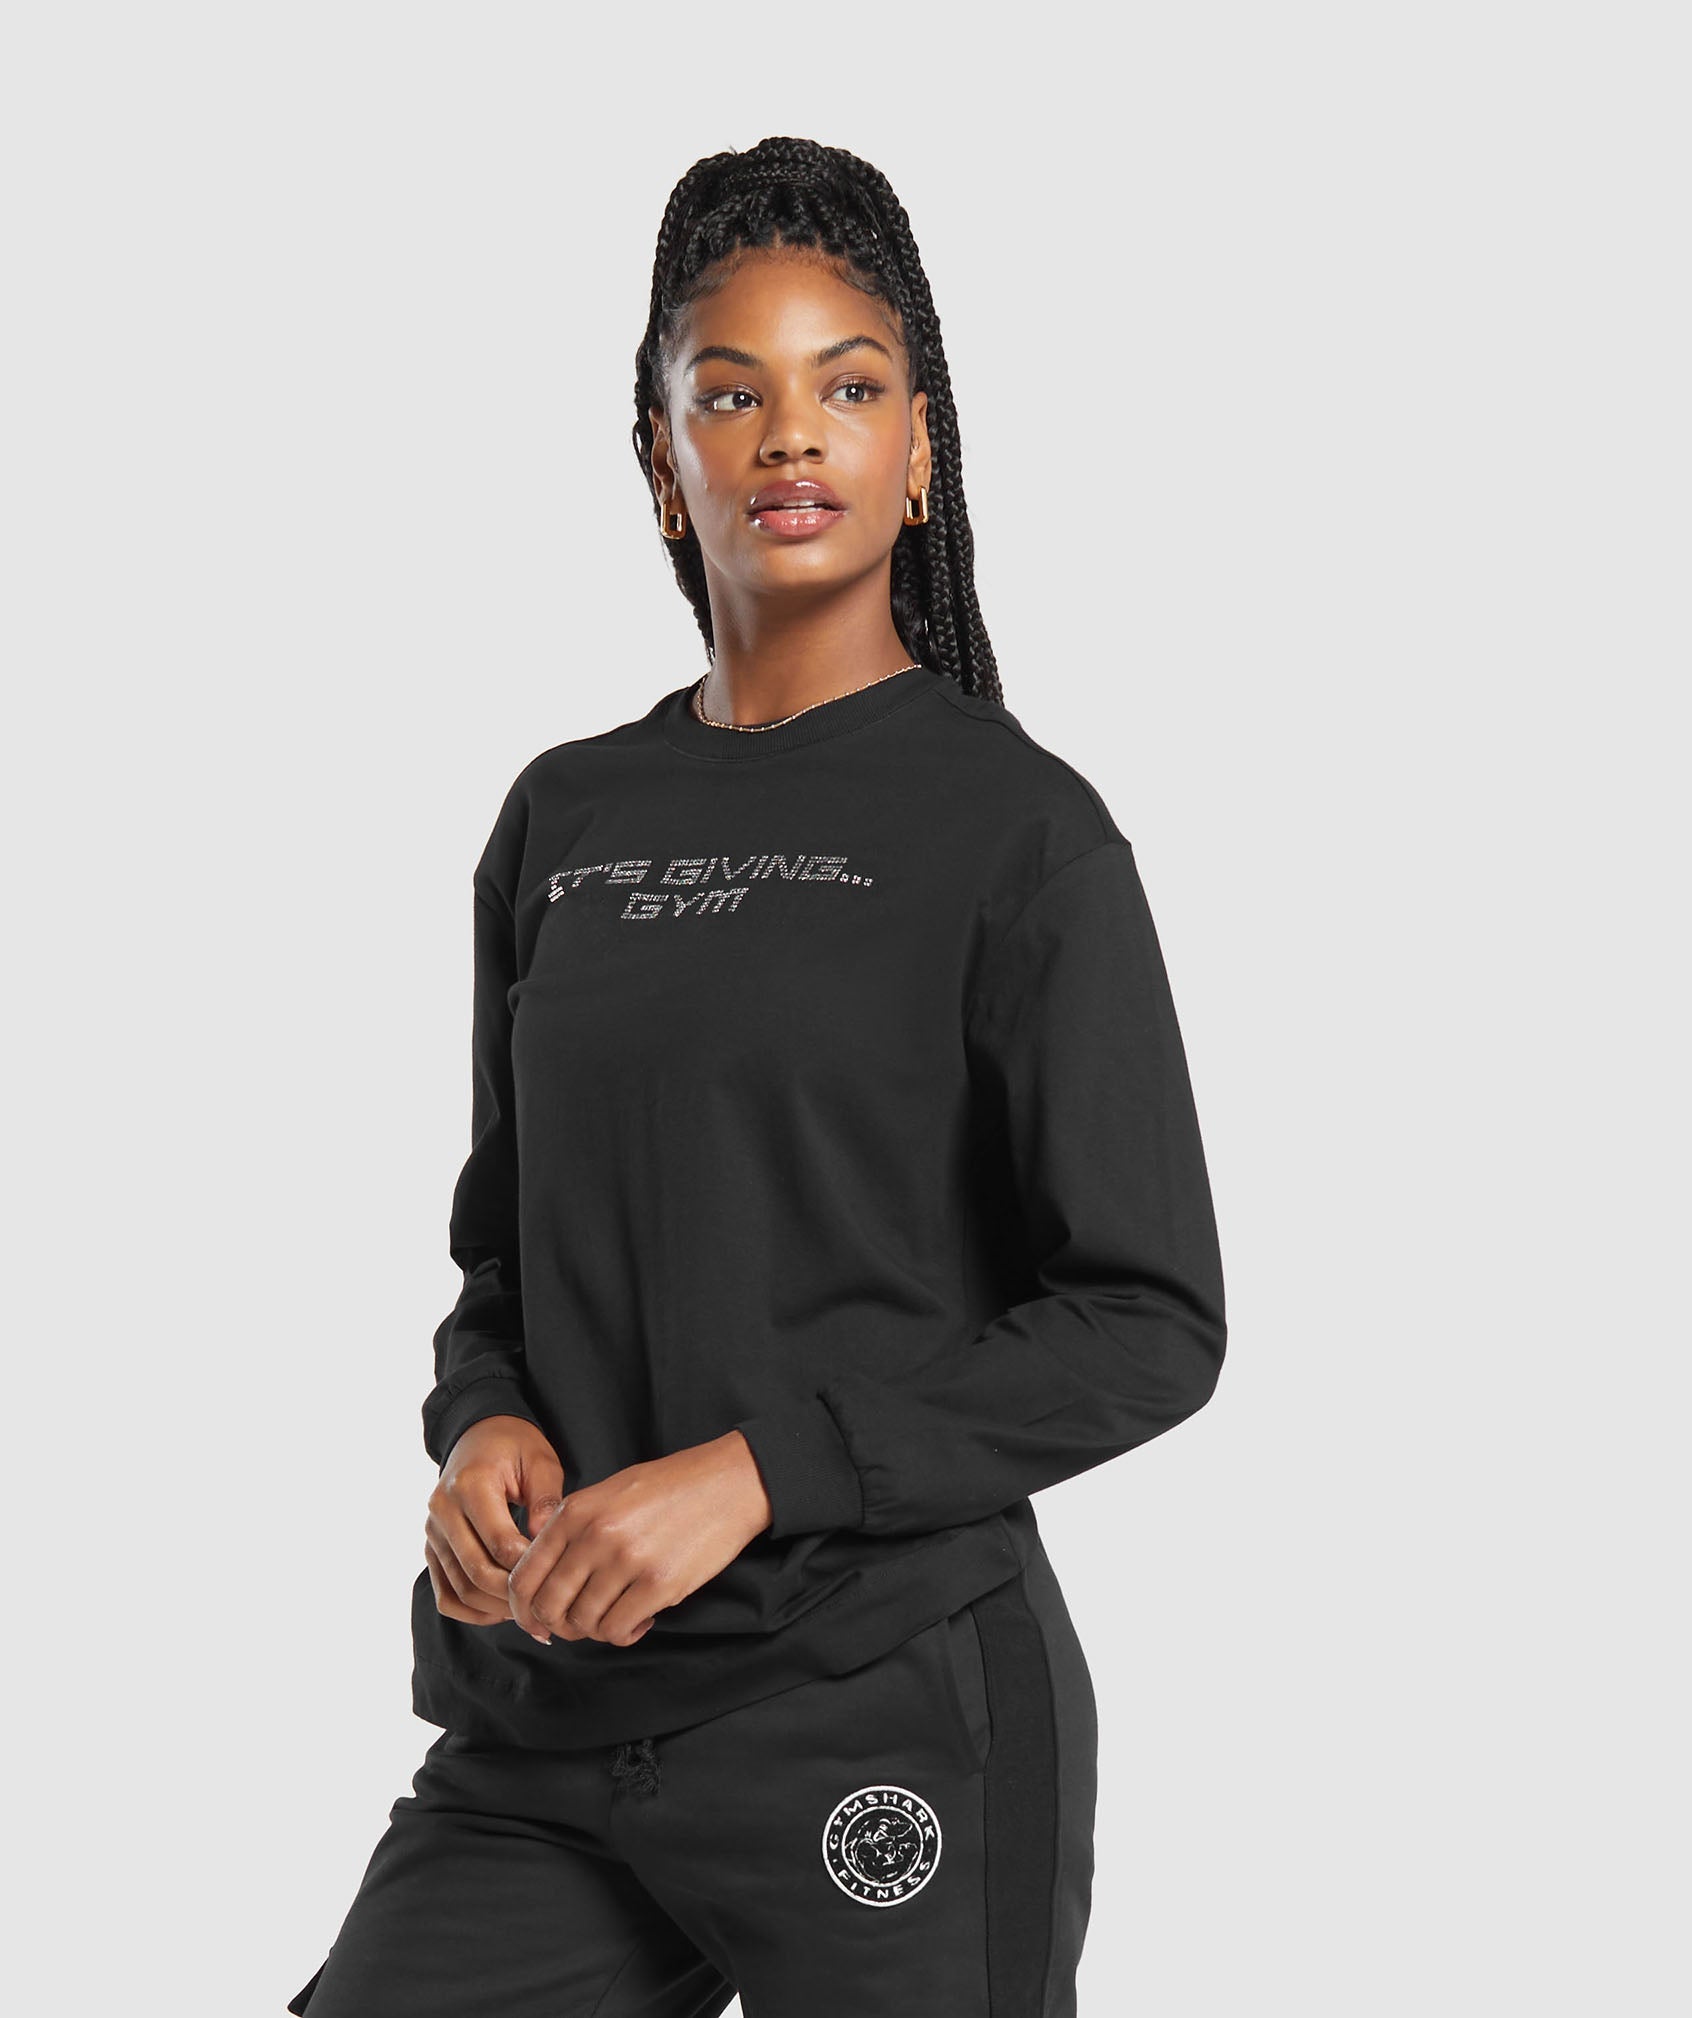 Its Giving Gym Long Sleeve Top in Black - view 3